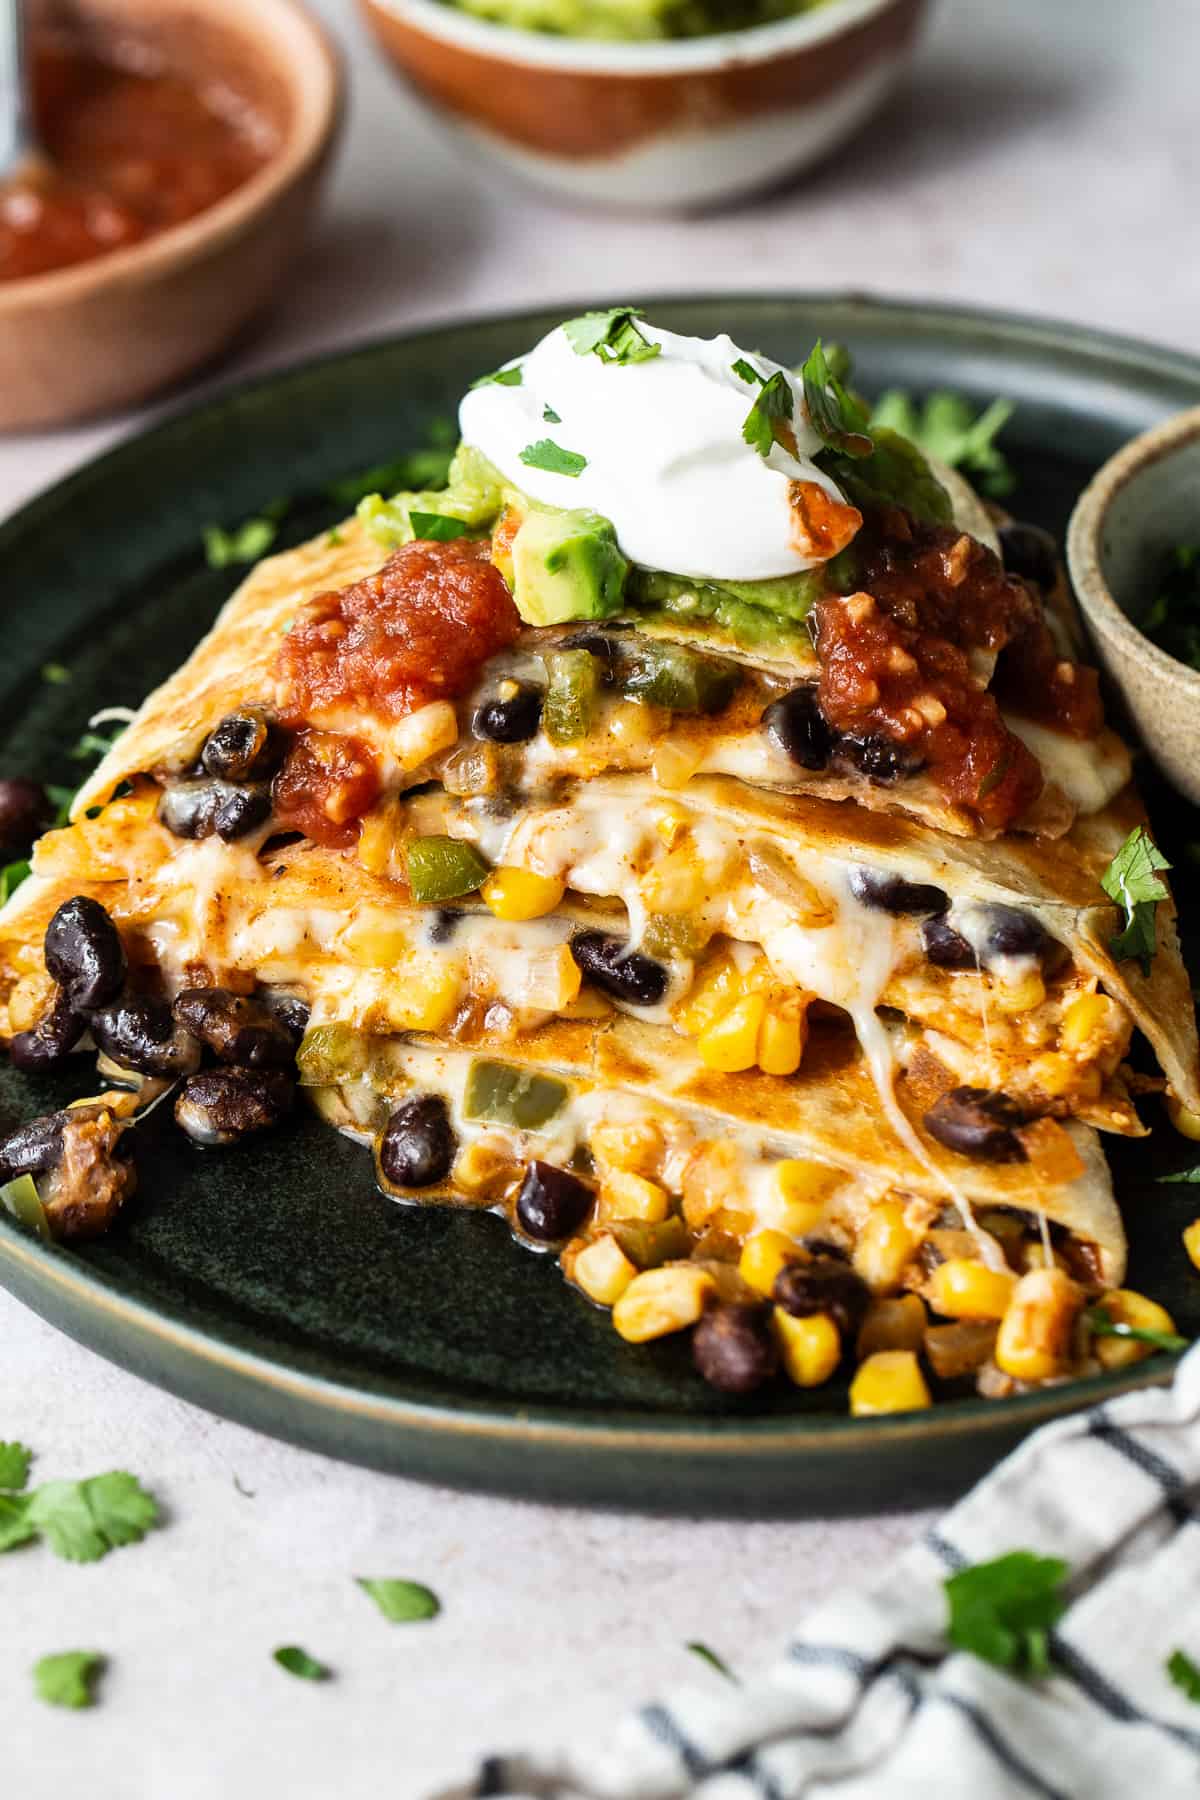 Black bean quesadillas stacked on top of one another served with sour cream, guacamole, and salsa.